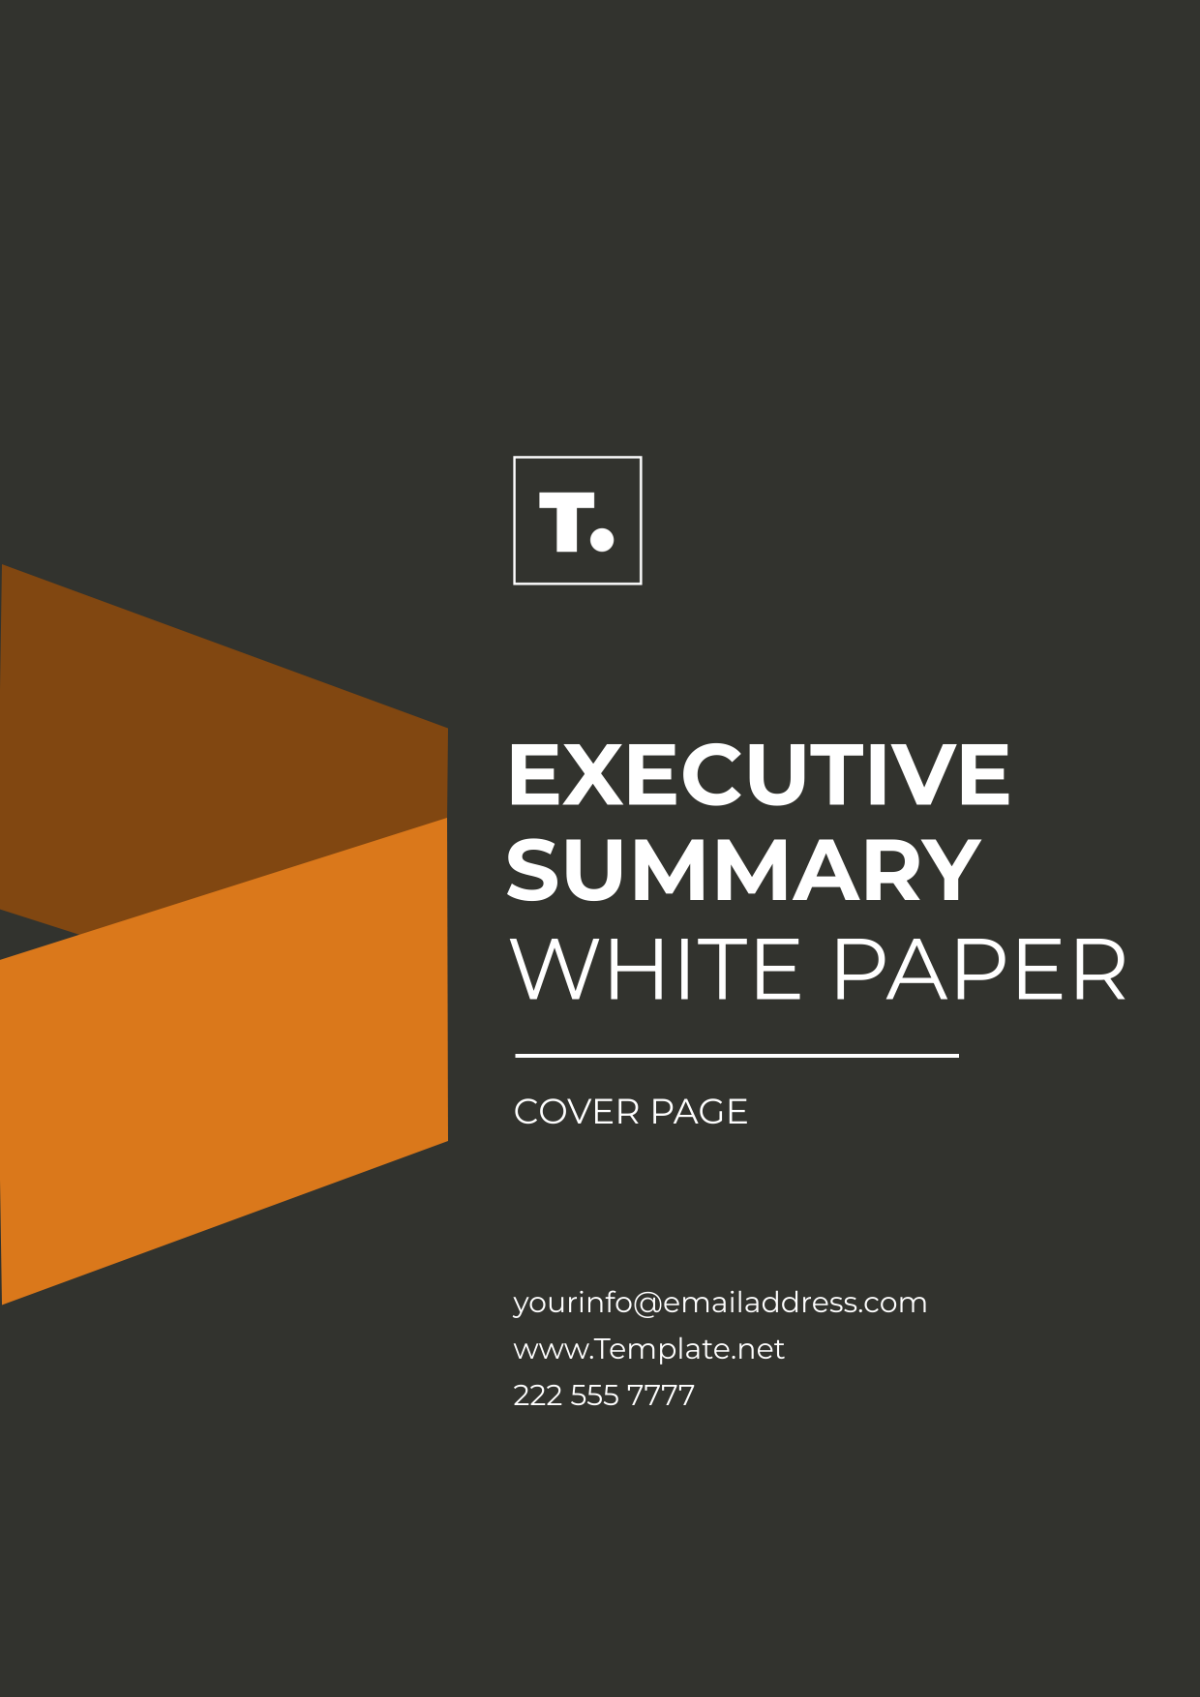 Executive Summary White Paper Cover Page